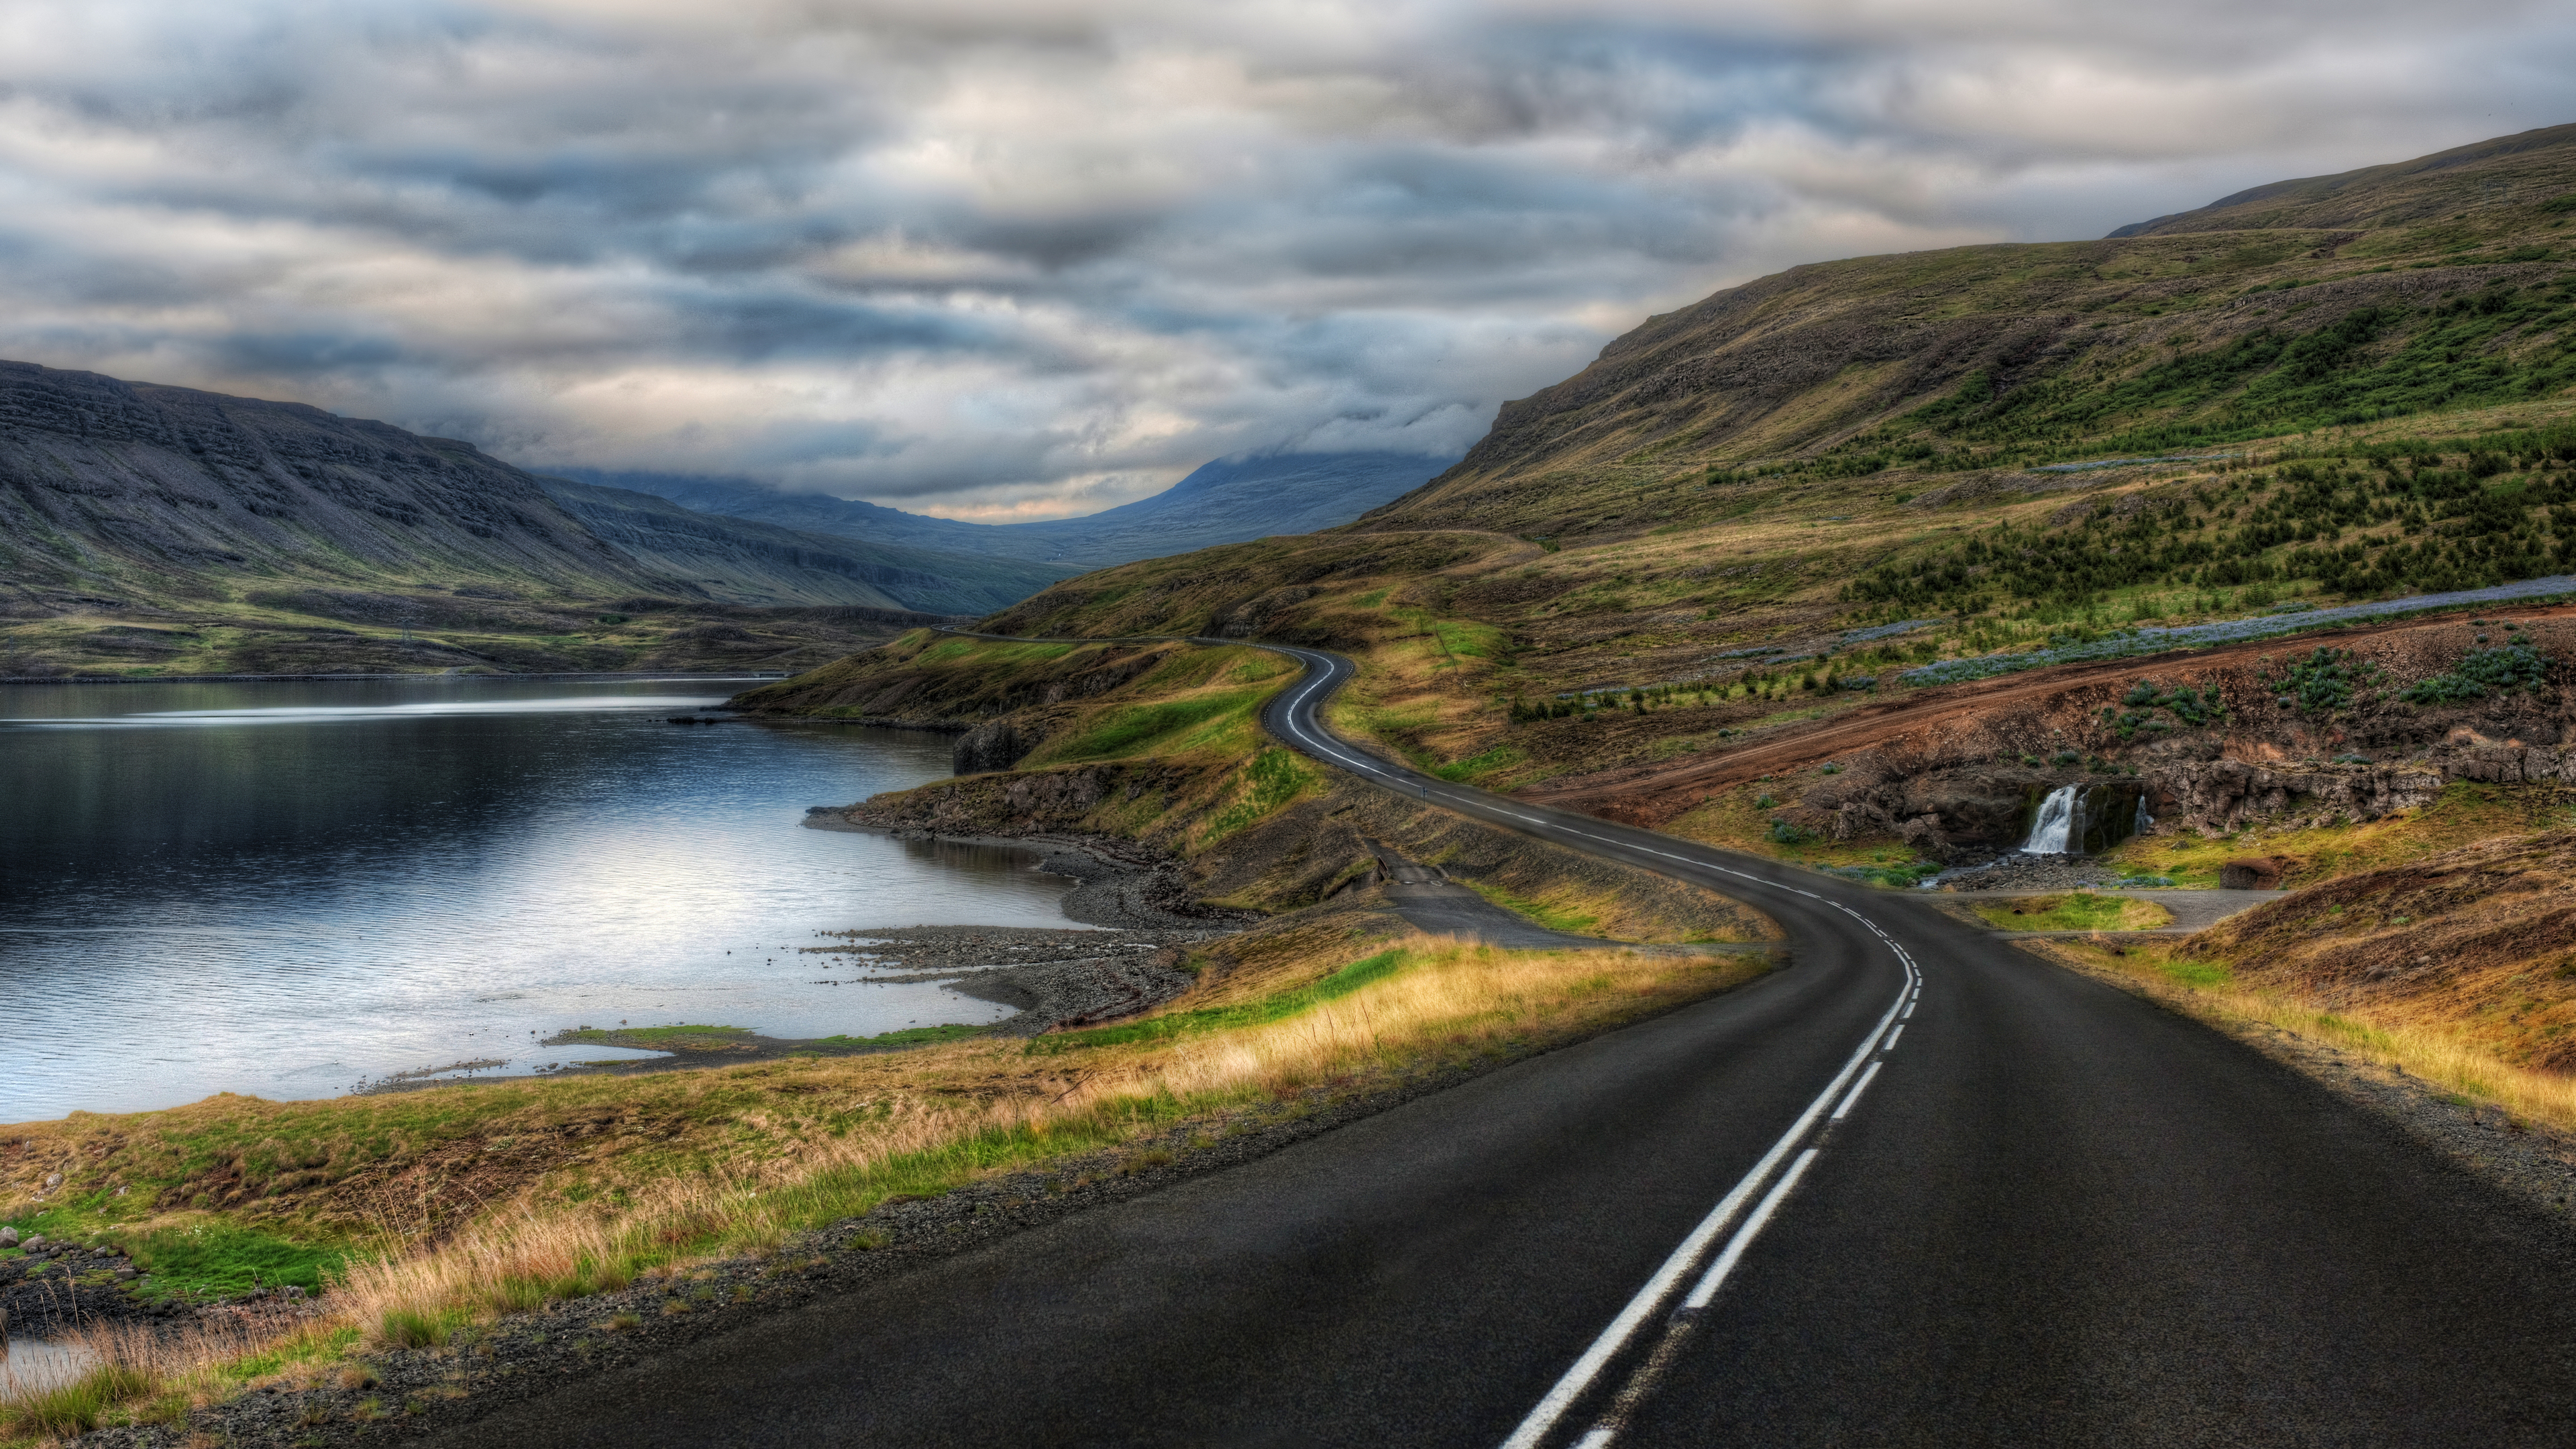 Landscape Iceland Trey Ratcliff Photography Nature Road Mountains Water Hills Grass Clouds 3840x2160